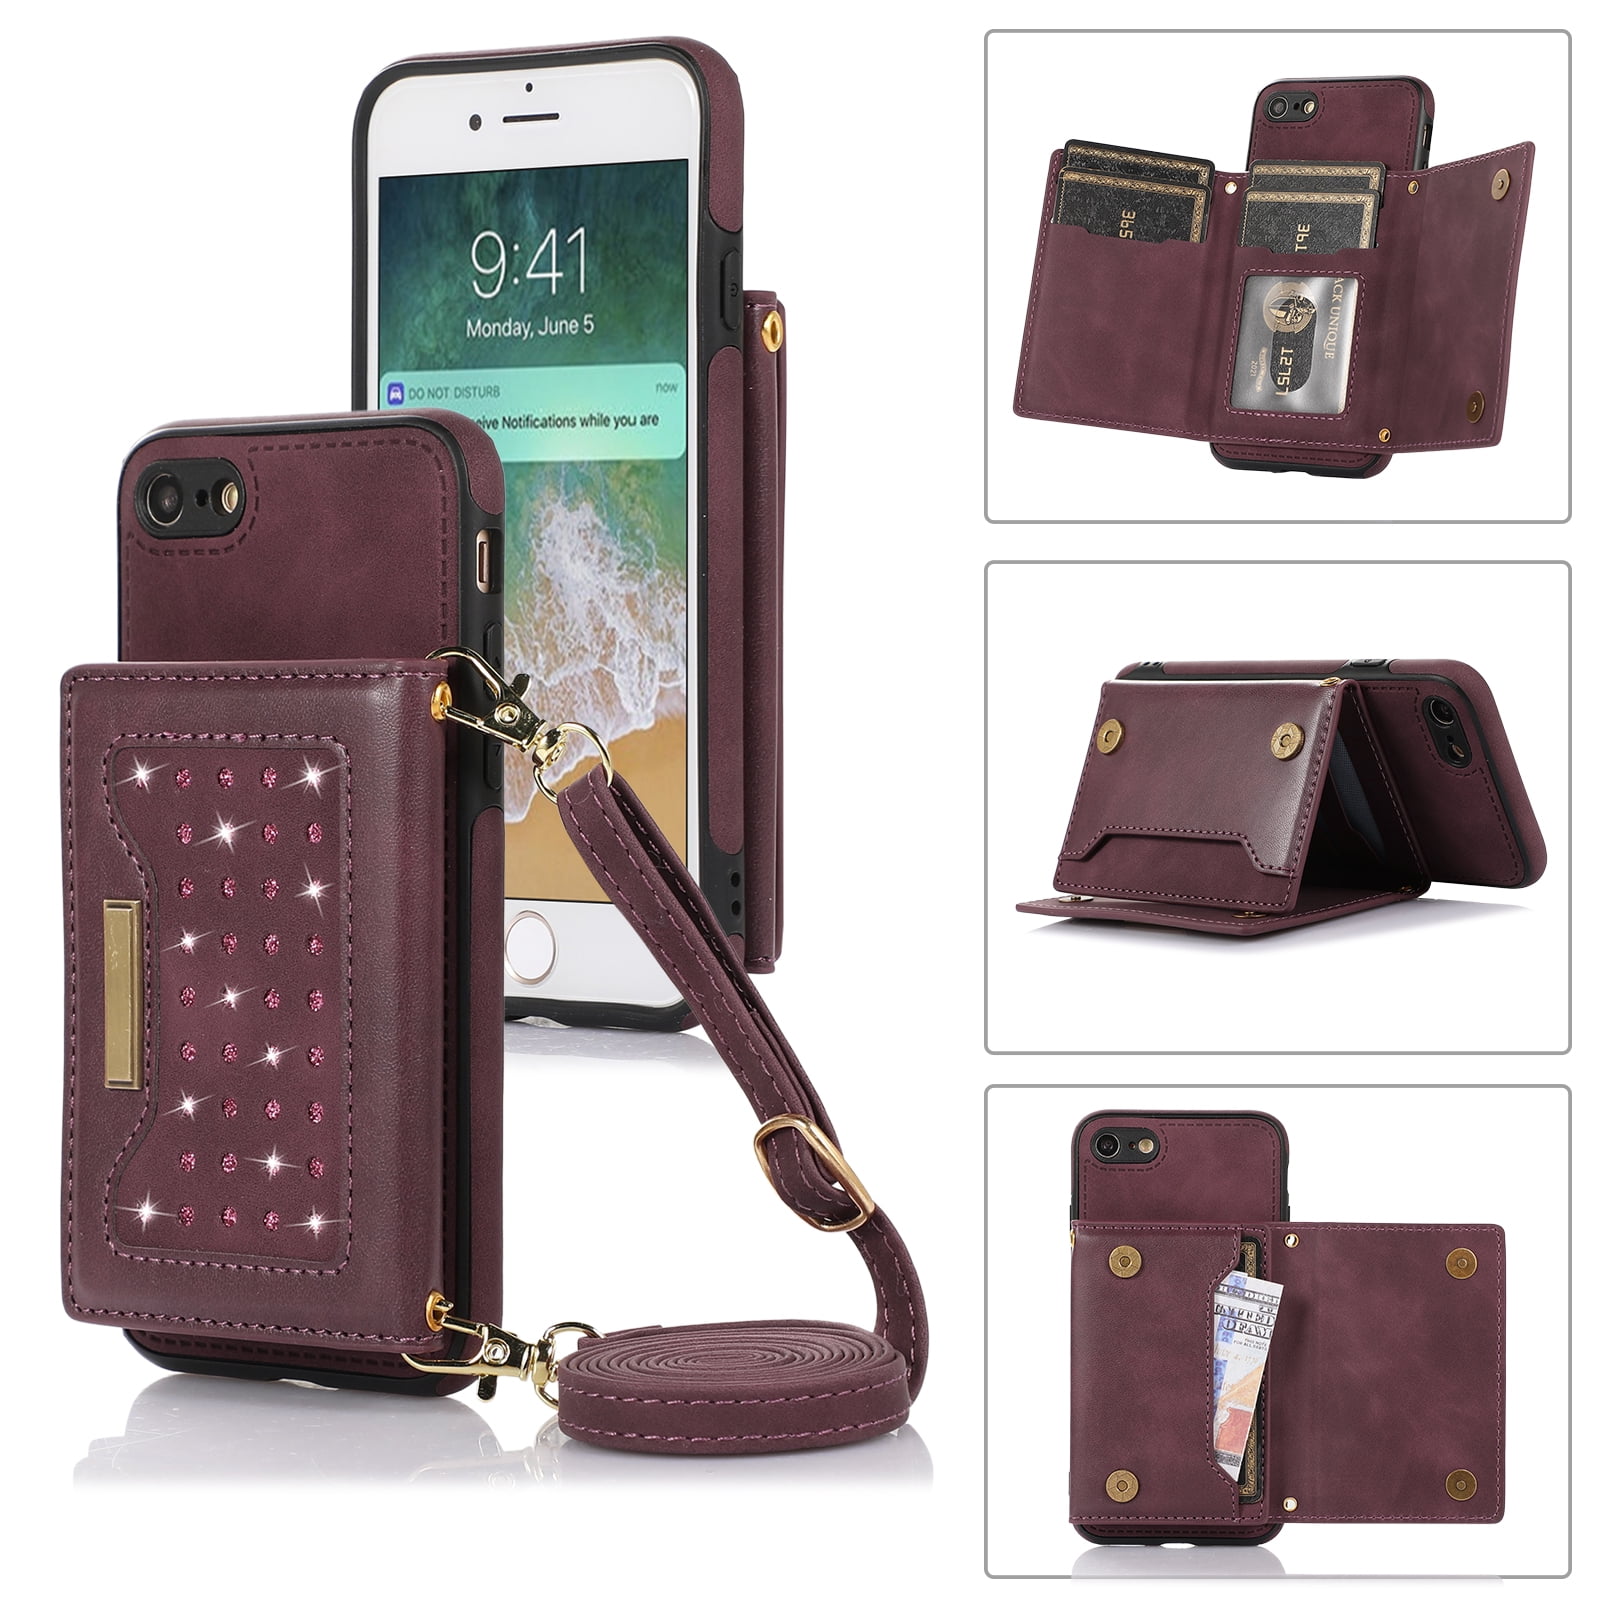 iPhone 6 Wallet Phone Case with Wrist Strap by Ed Hicks, Shockproof,  Genuine Leather